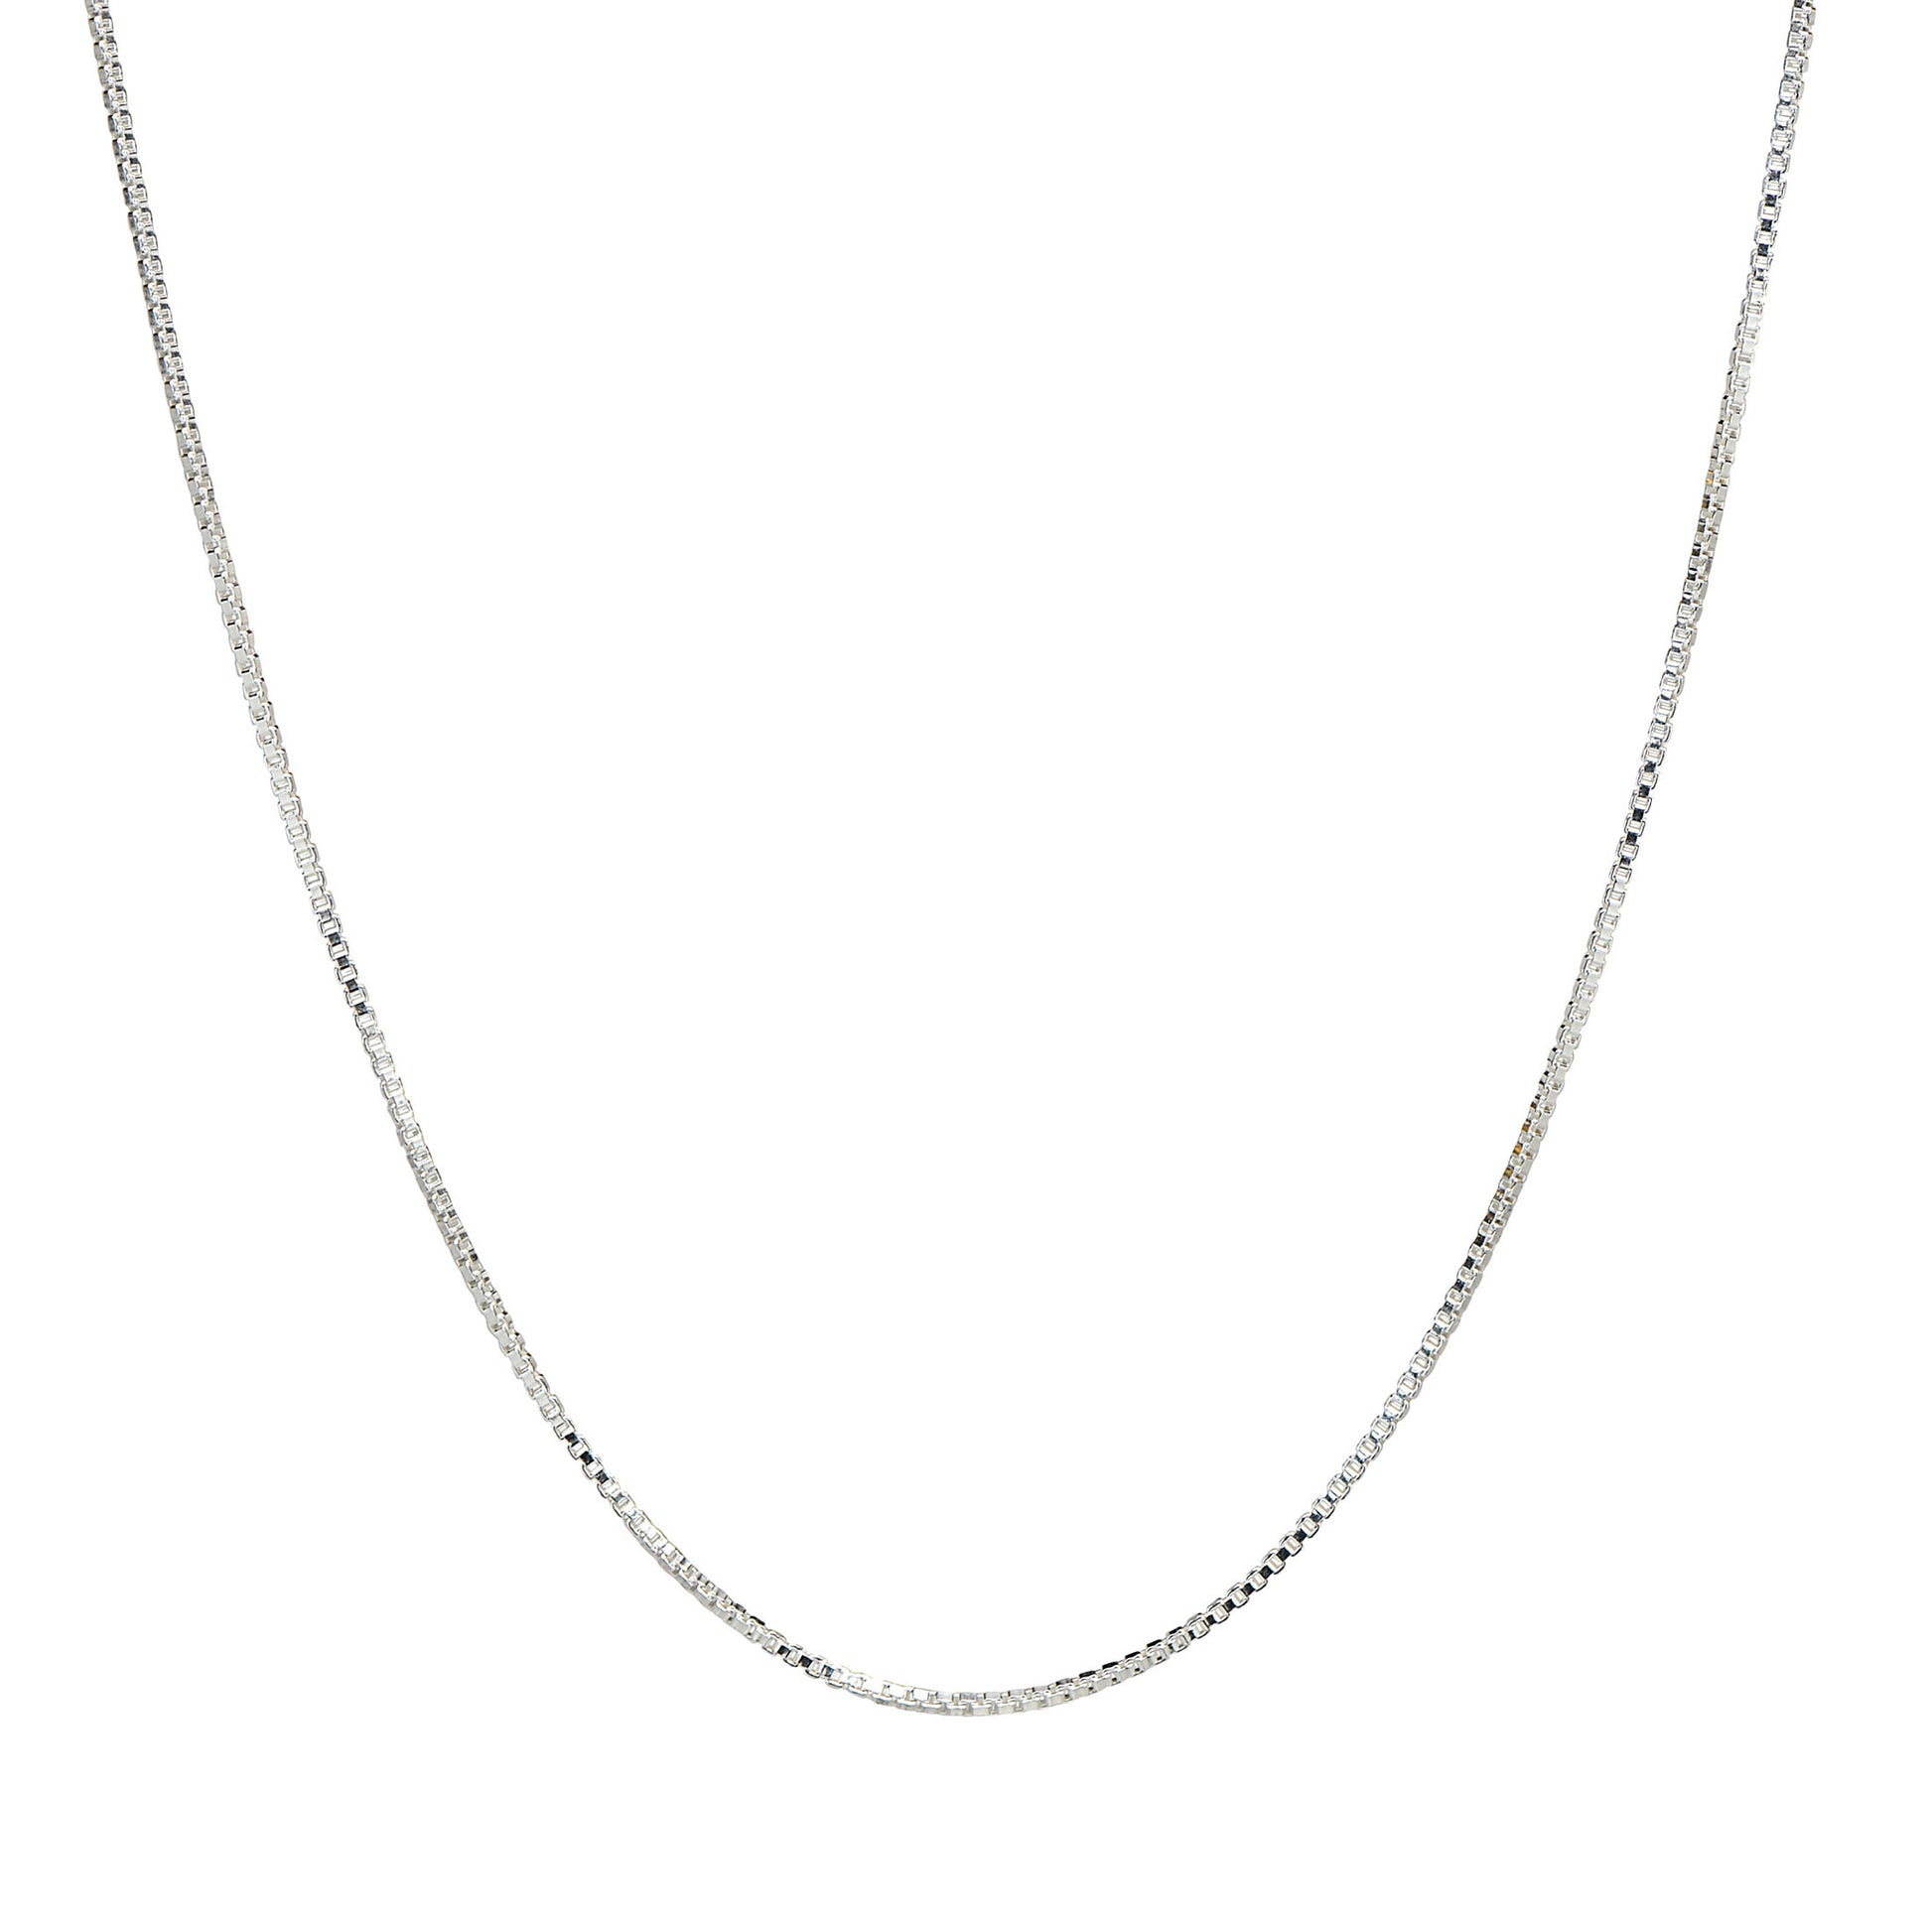 1.5MM Sterling Silver Box Chain with Lobster Claw Clasp